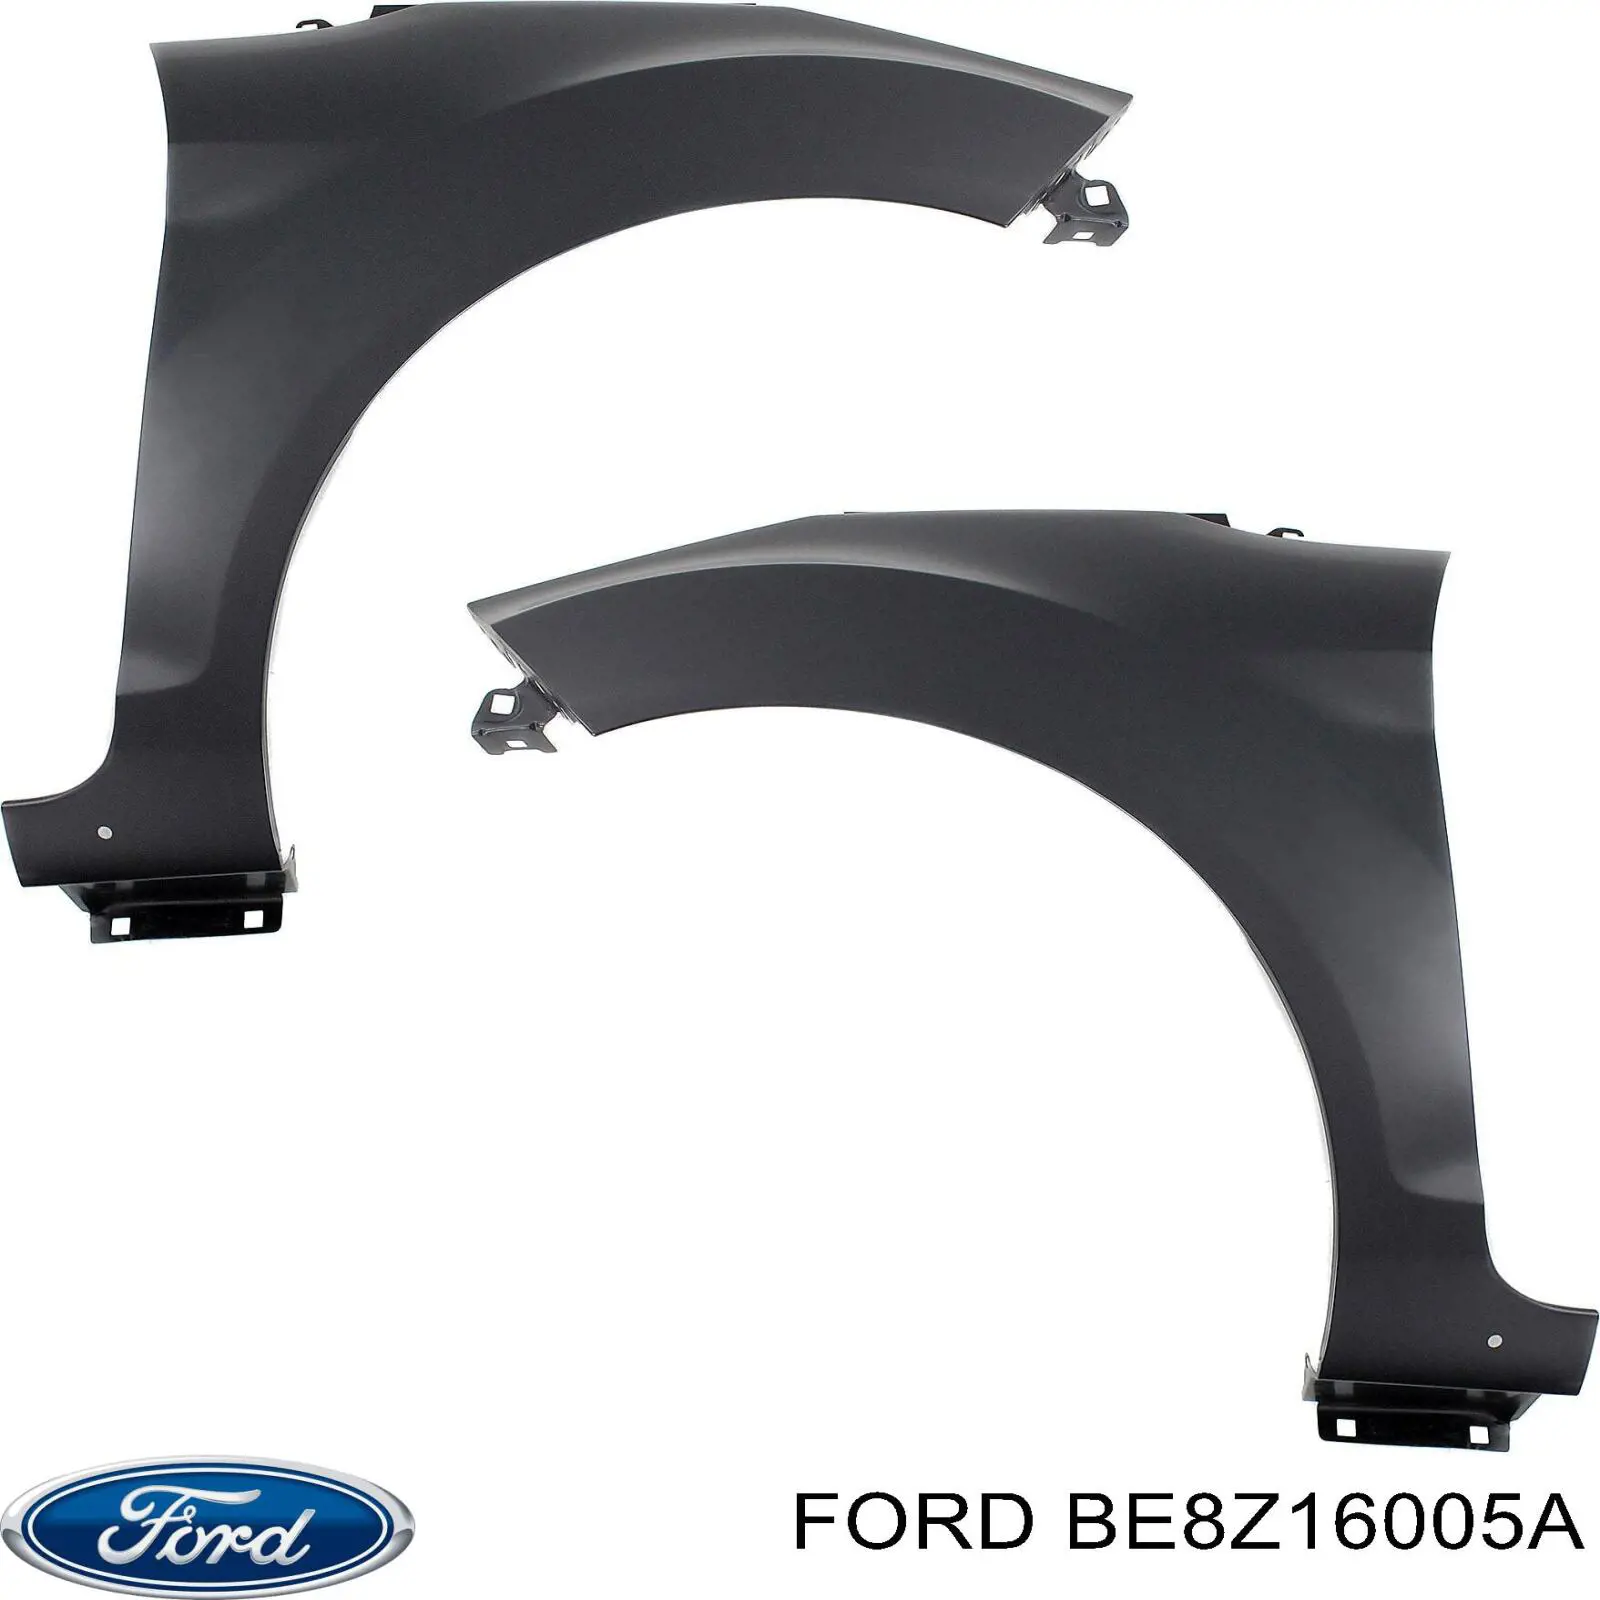 BE8Z16005A Ford крыло переднее правое